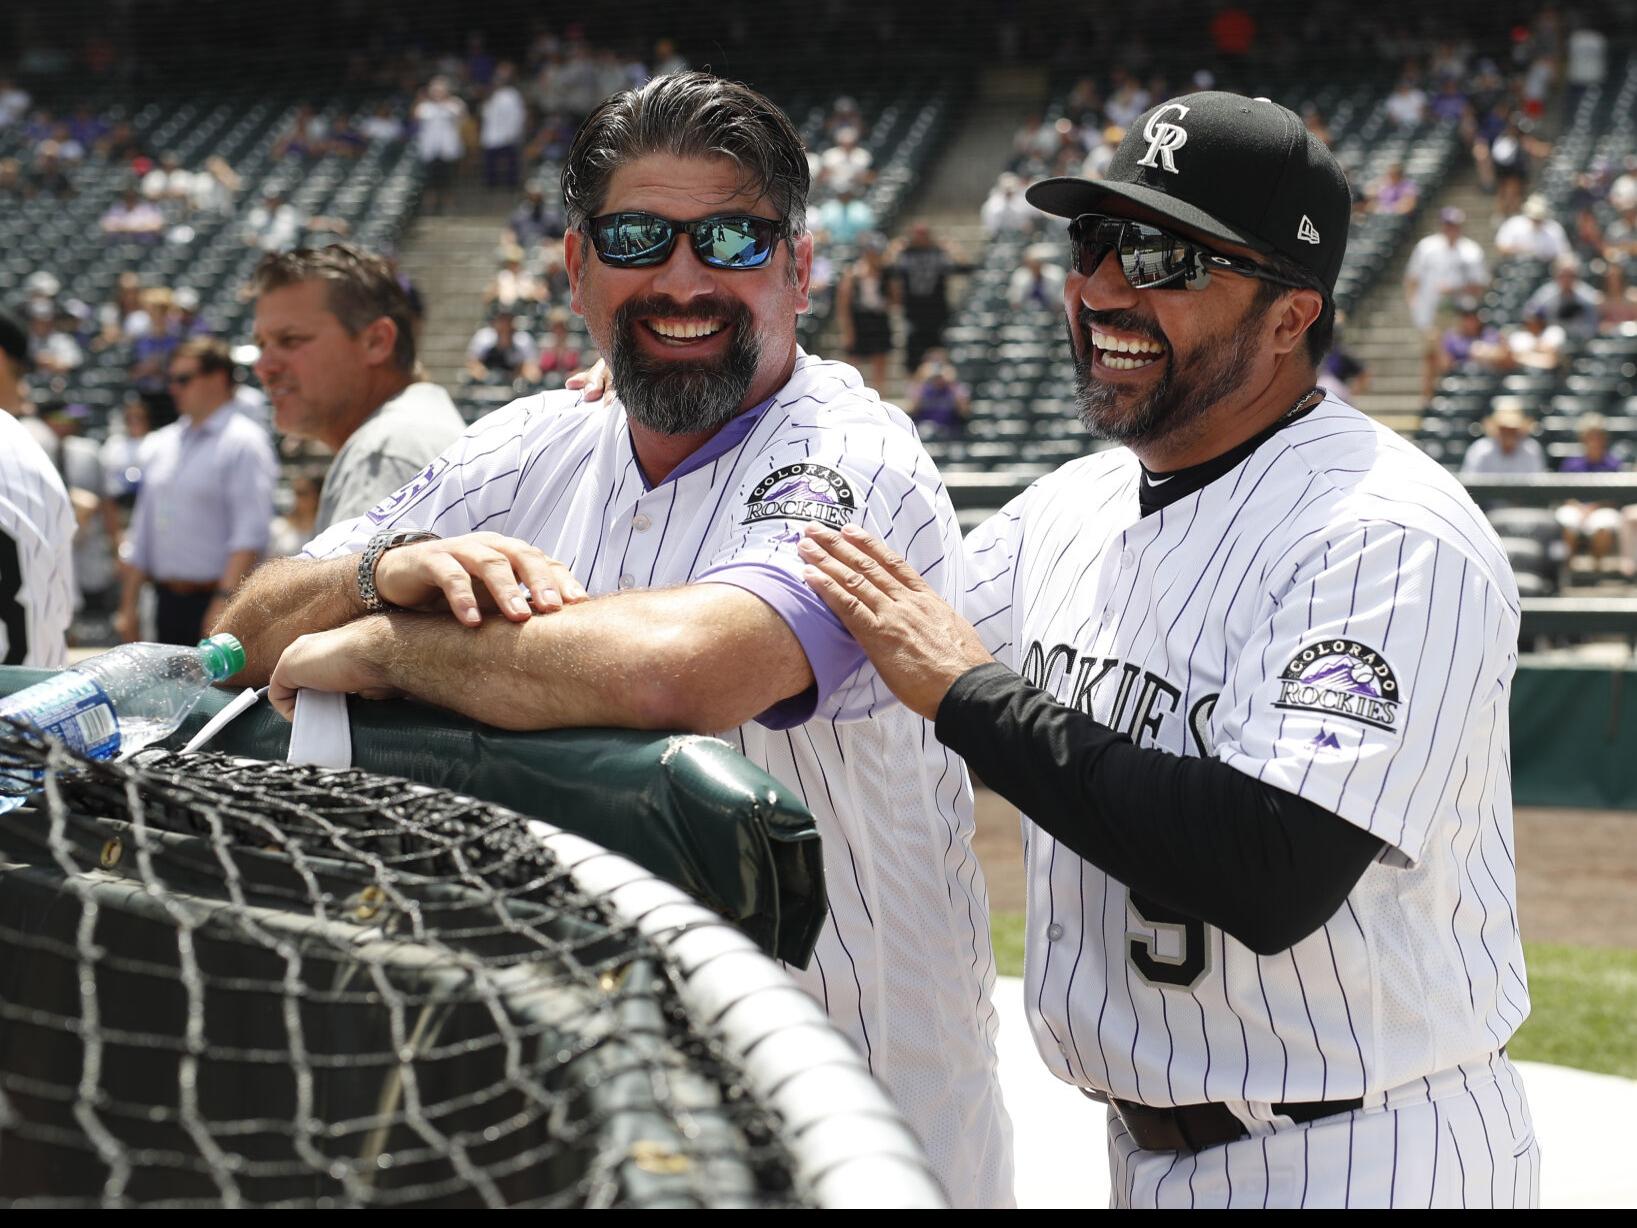 Todd Helton returns to Rockies as special assistant to general manager, Sports